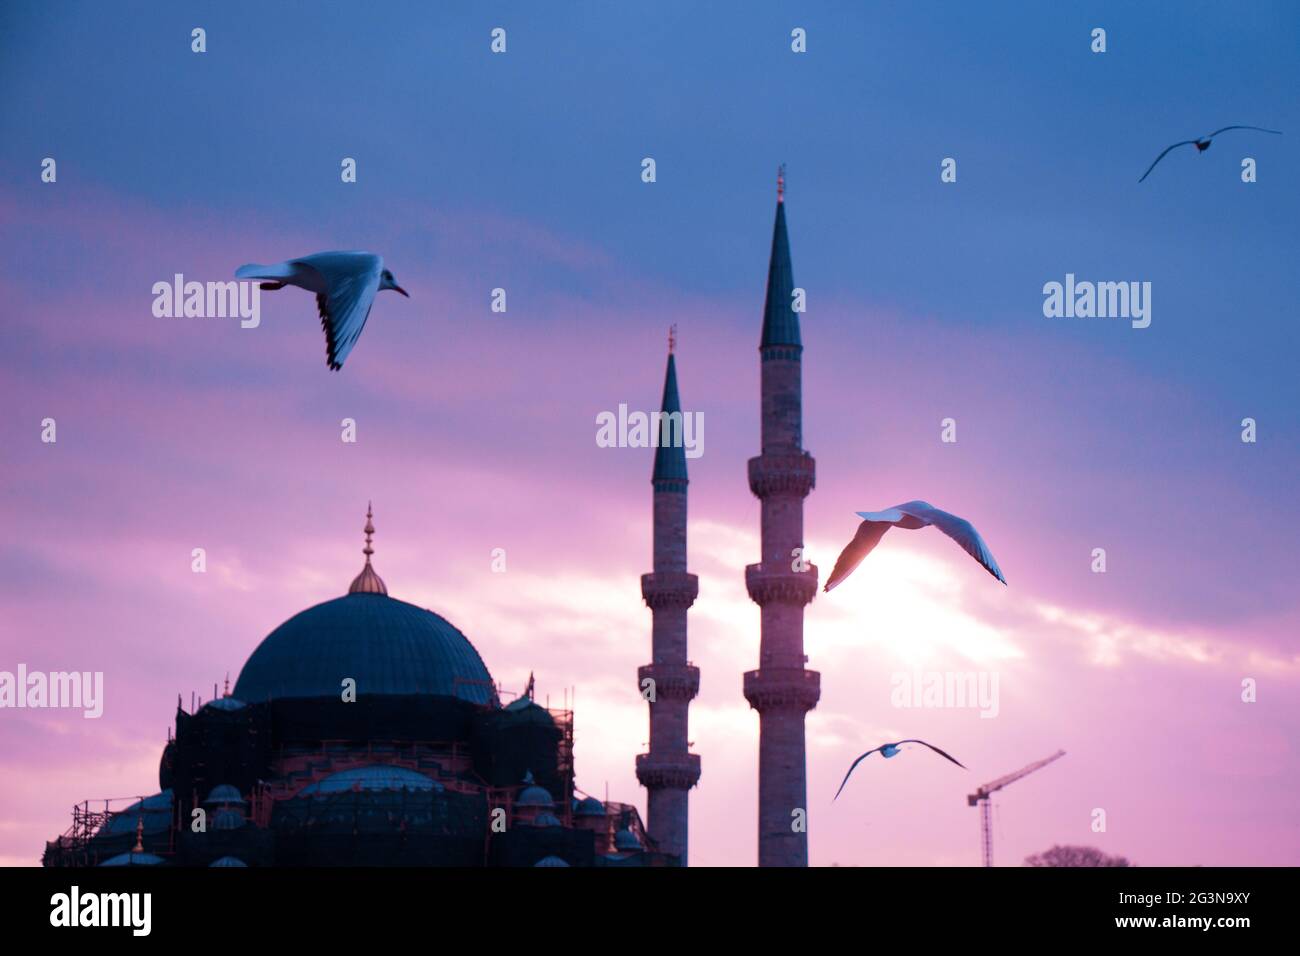 Minaret of Ottoman Mosques in view Stock Photo